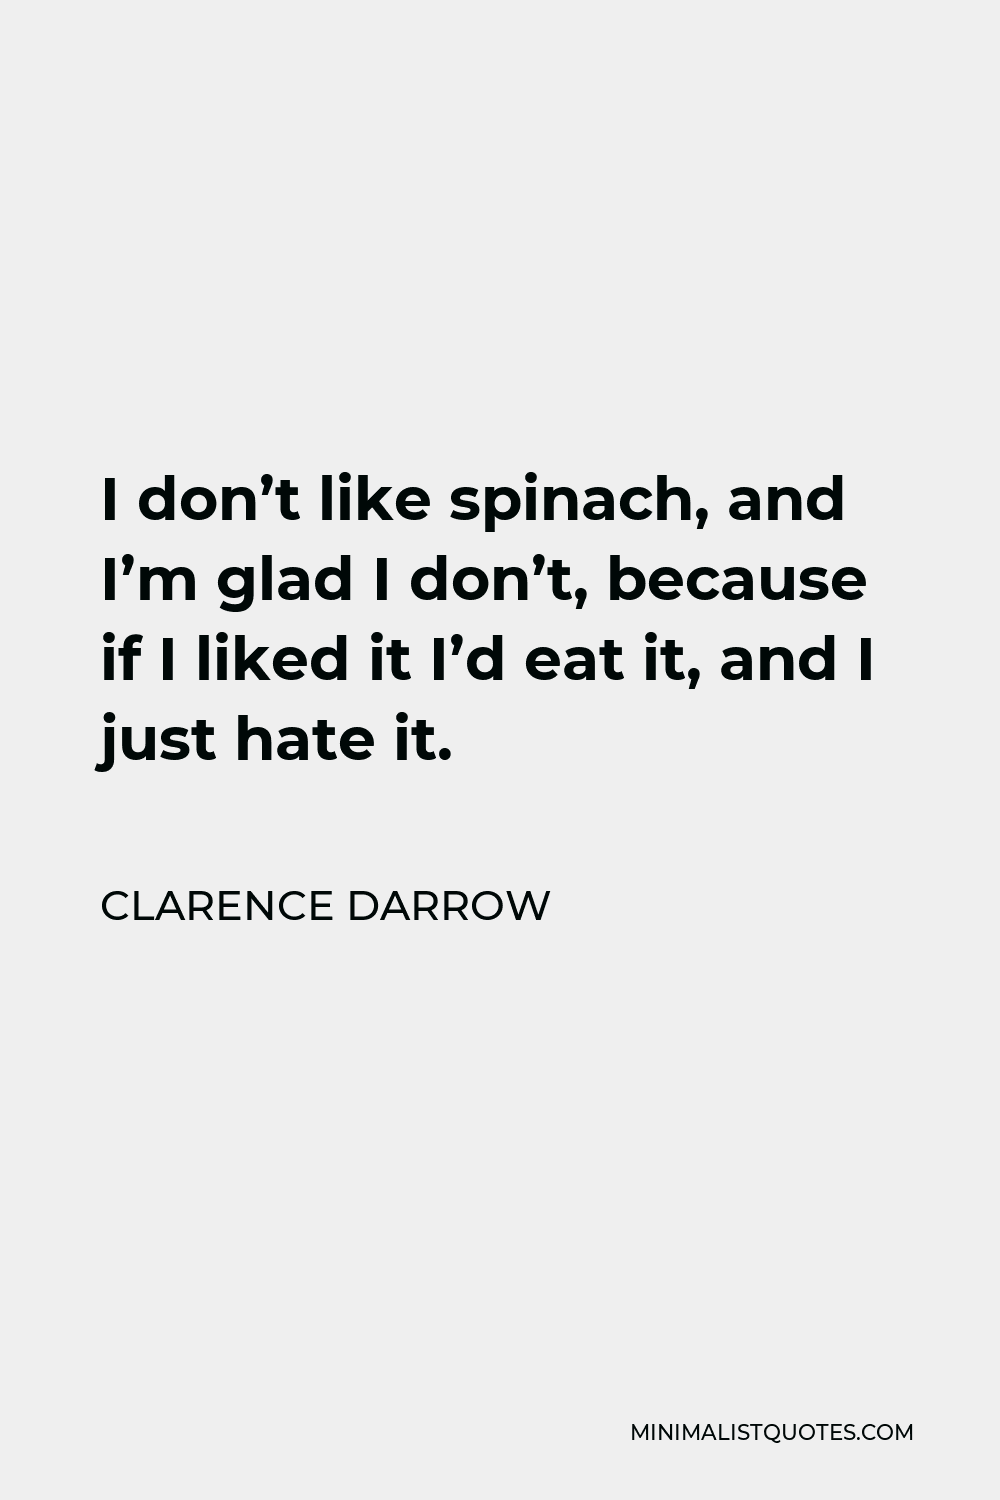 Clarence Darrow Quote - I don’t like spinach, and I’m glad I don’t, because if I liked it I’d eat it, and I just hate it.